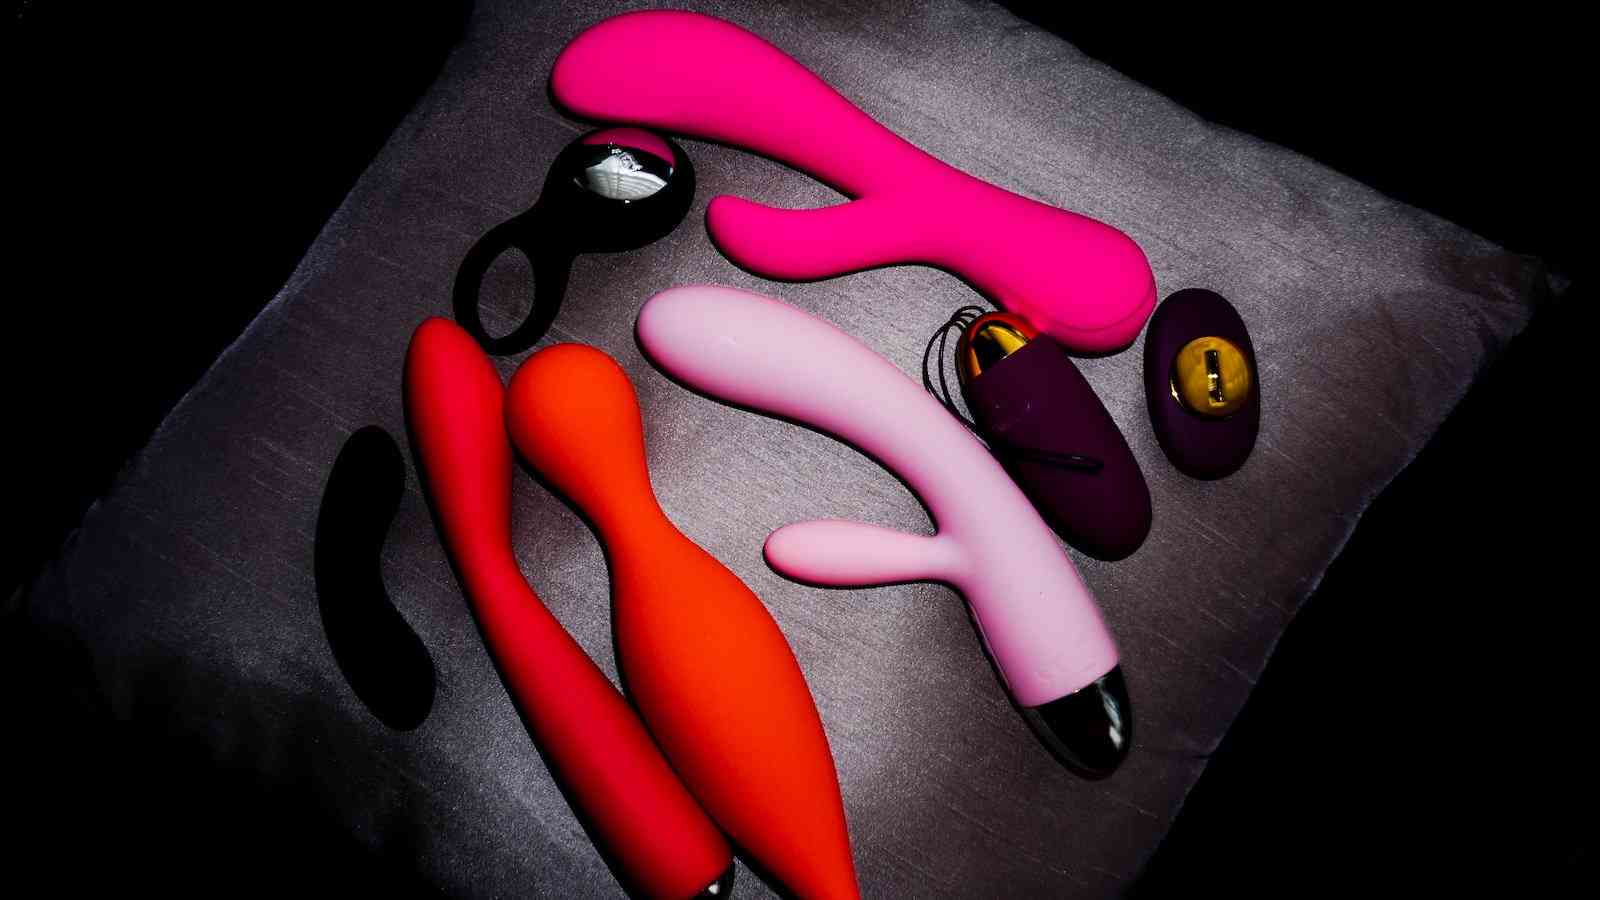 Follow our tips to discretely pack sex toys when traveling